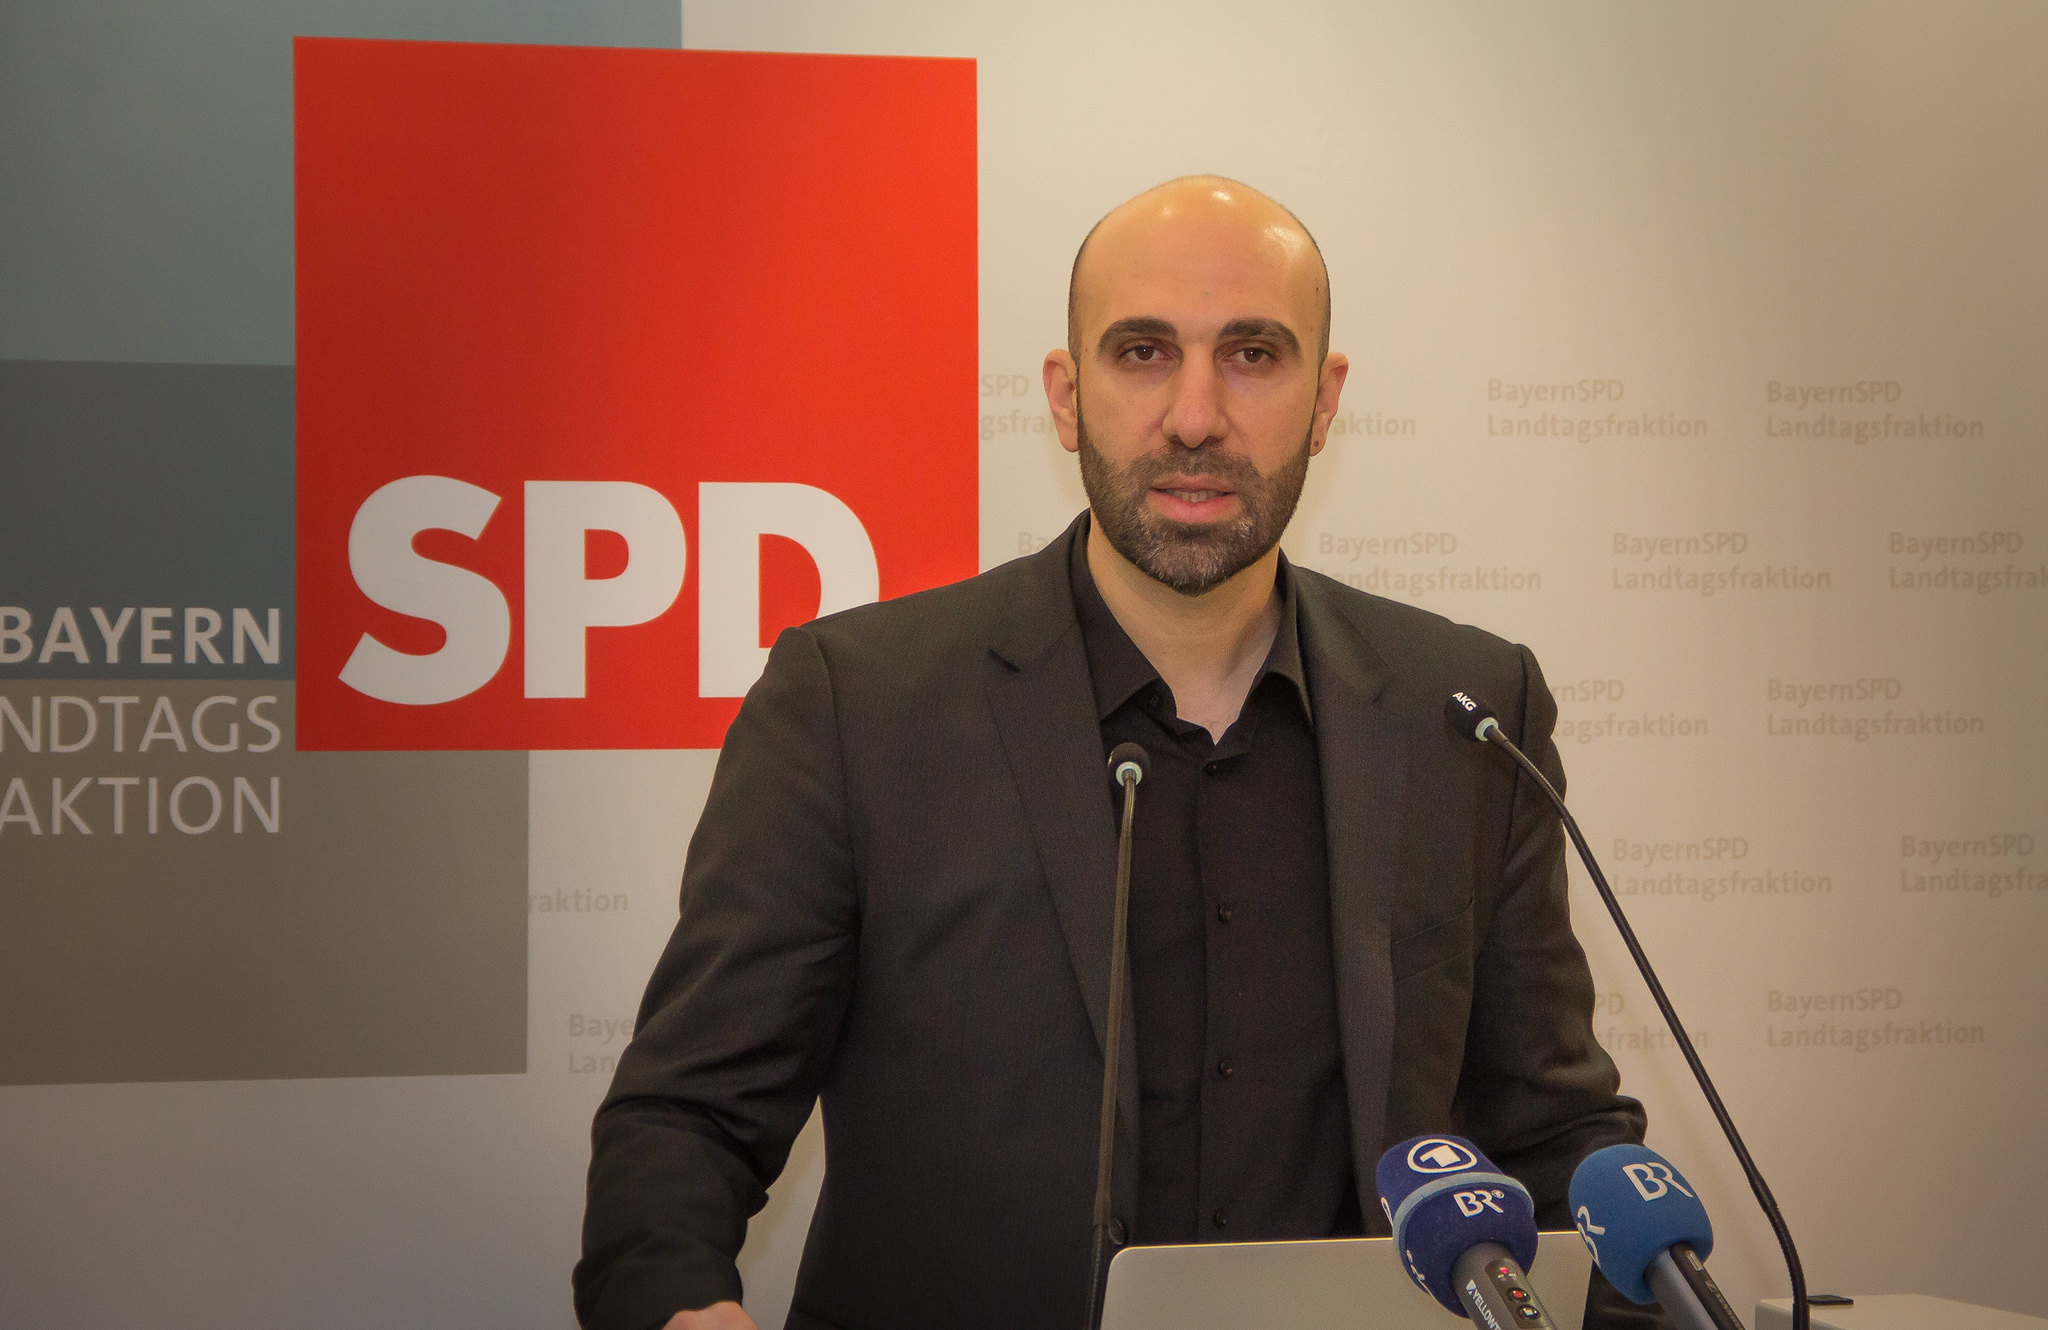 Ahmad Mansour, director of MIND prevention, delivering a lecture on religious extremism among youth, January 19, 2016. (BayernSPD-Landtagsfraktion/CC BY-ND 2.0